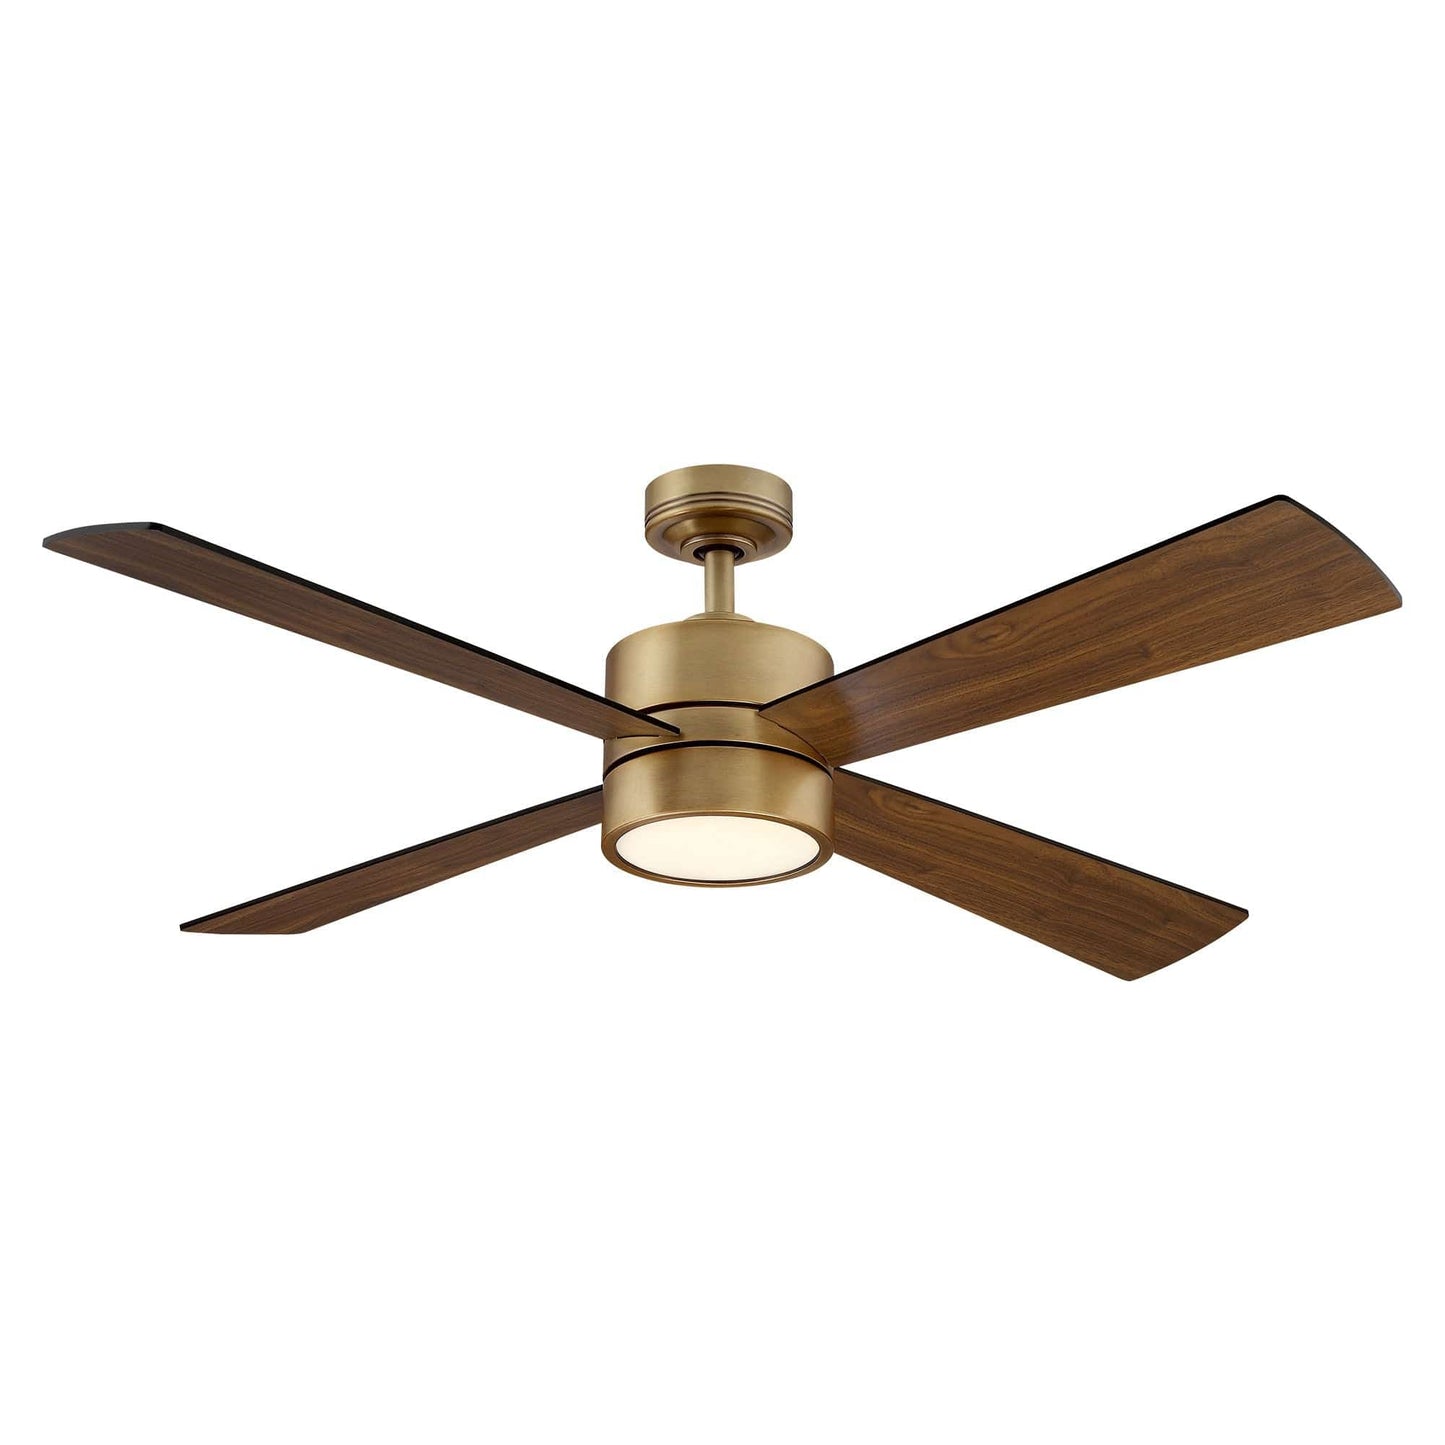 Parrot Uncle 52" Bucholz Industrial Downrod Mount Reversible Ceiling Fan with Lighting and Remote Control